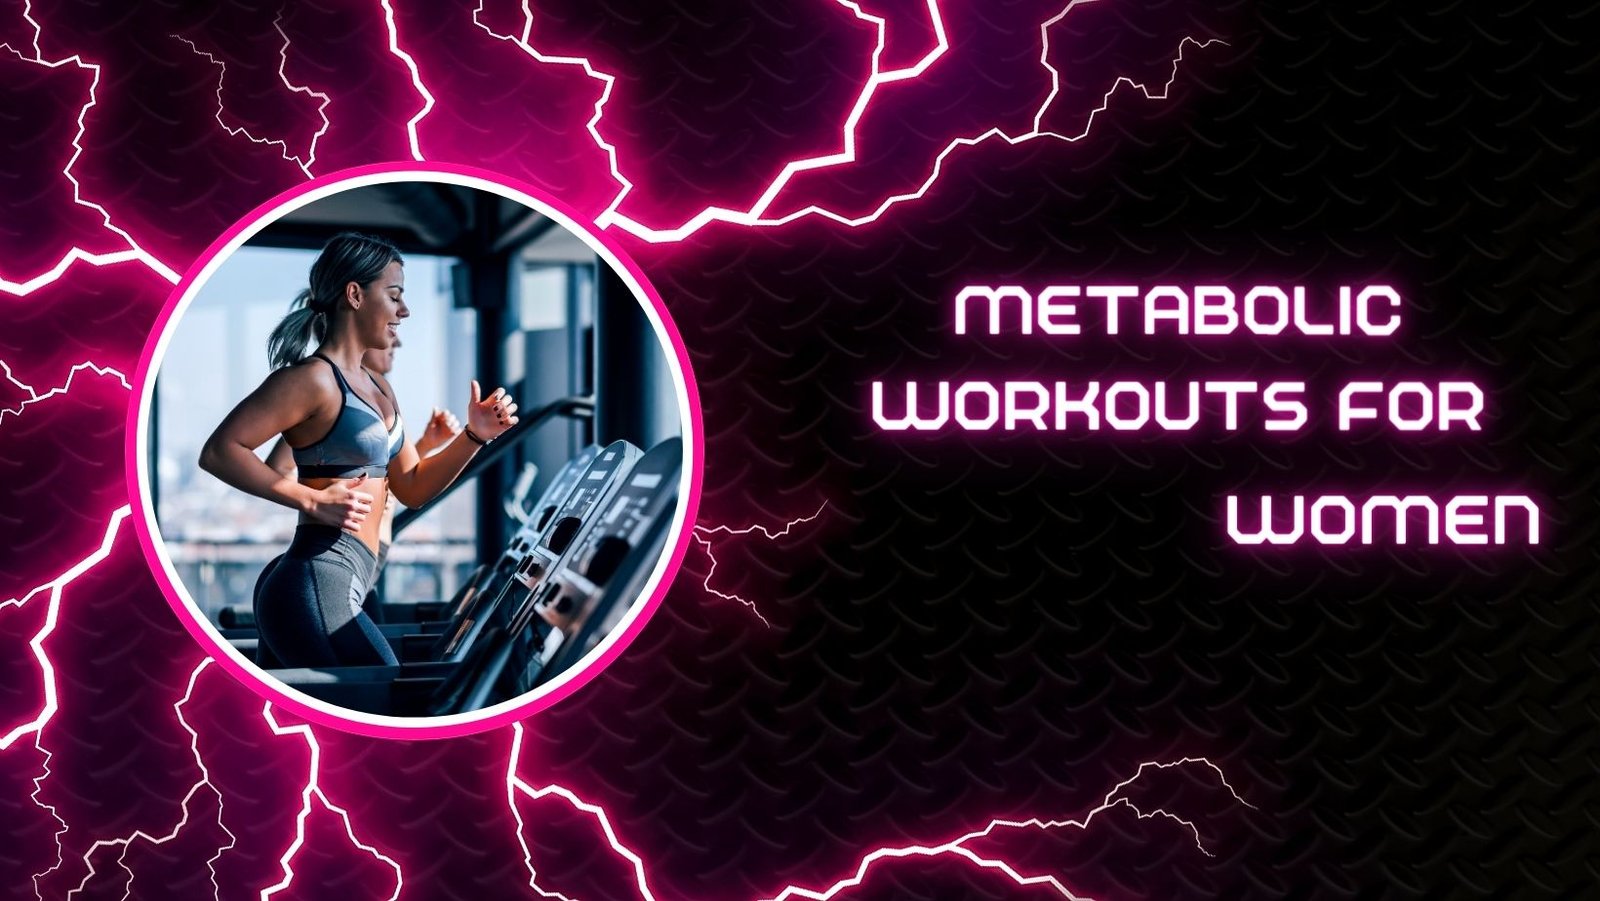 Metabolic Workouts for Women